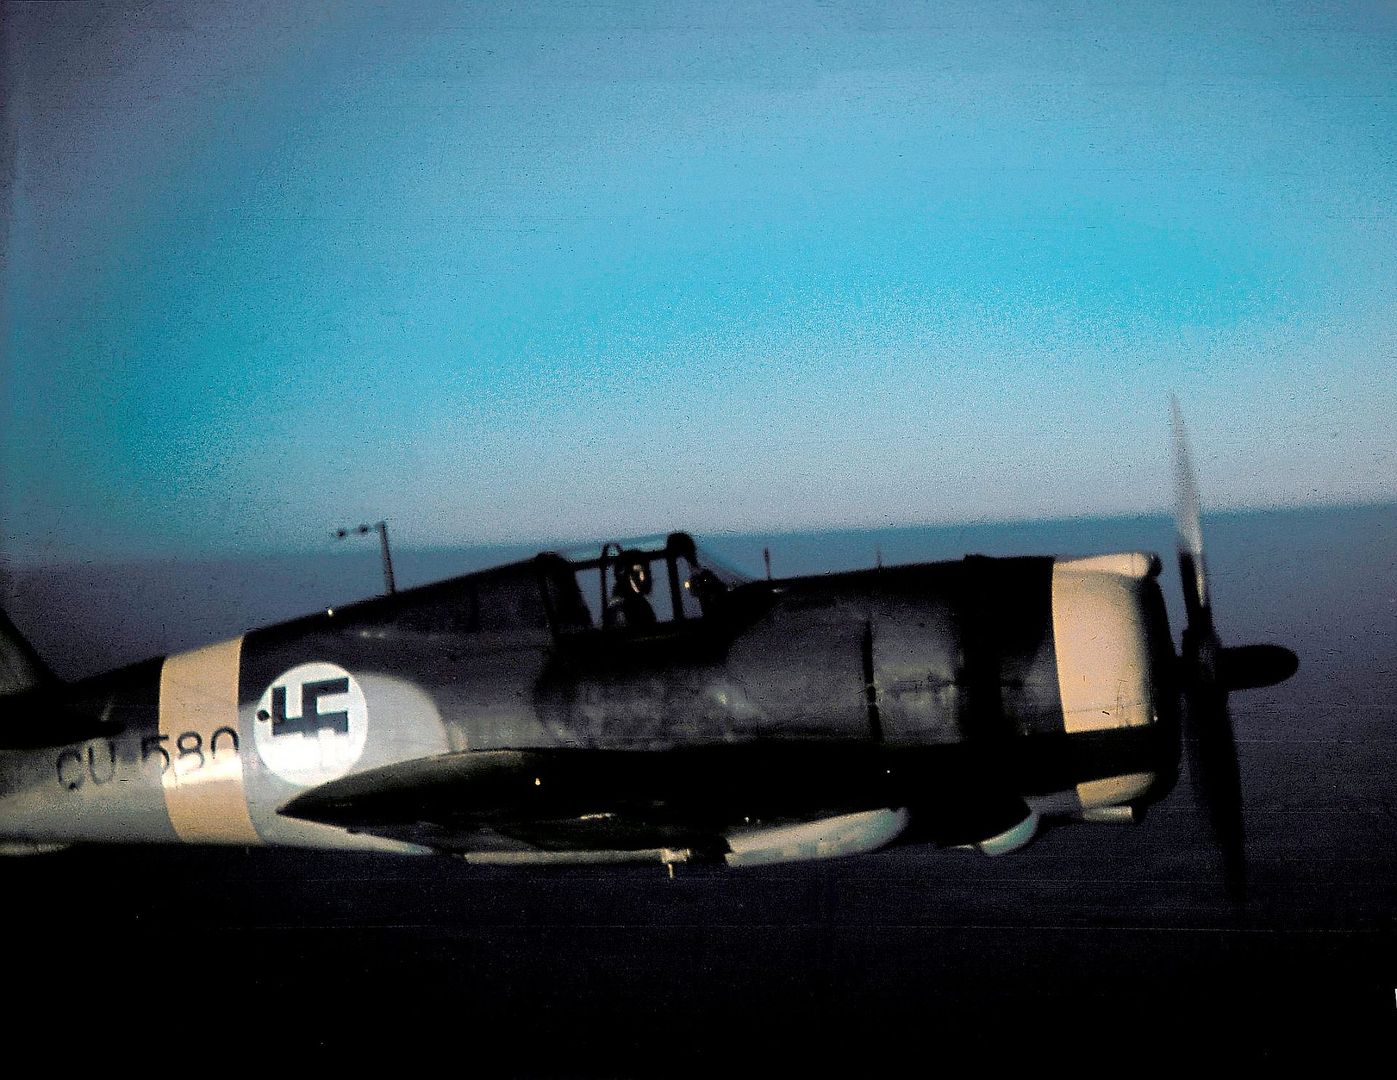 Curtiss Hawk 75A 2 CU 580 Lieutenant Jaakko Hillo From 32 Th Fighter Squadron Of The Finnish Air Force